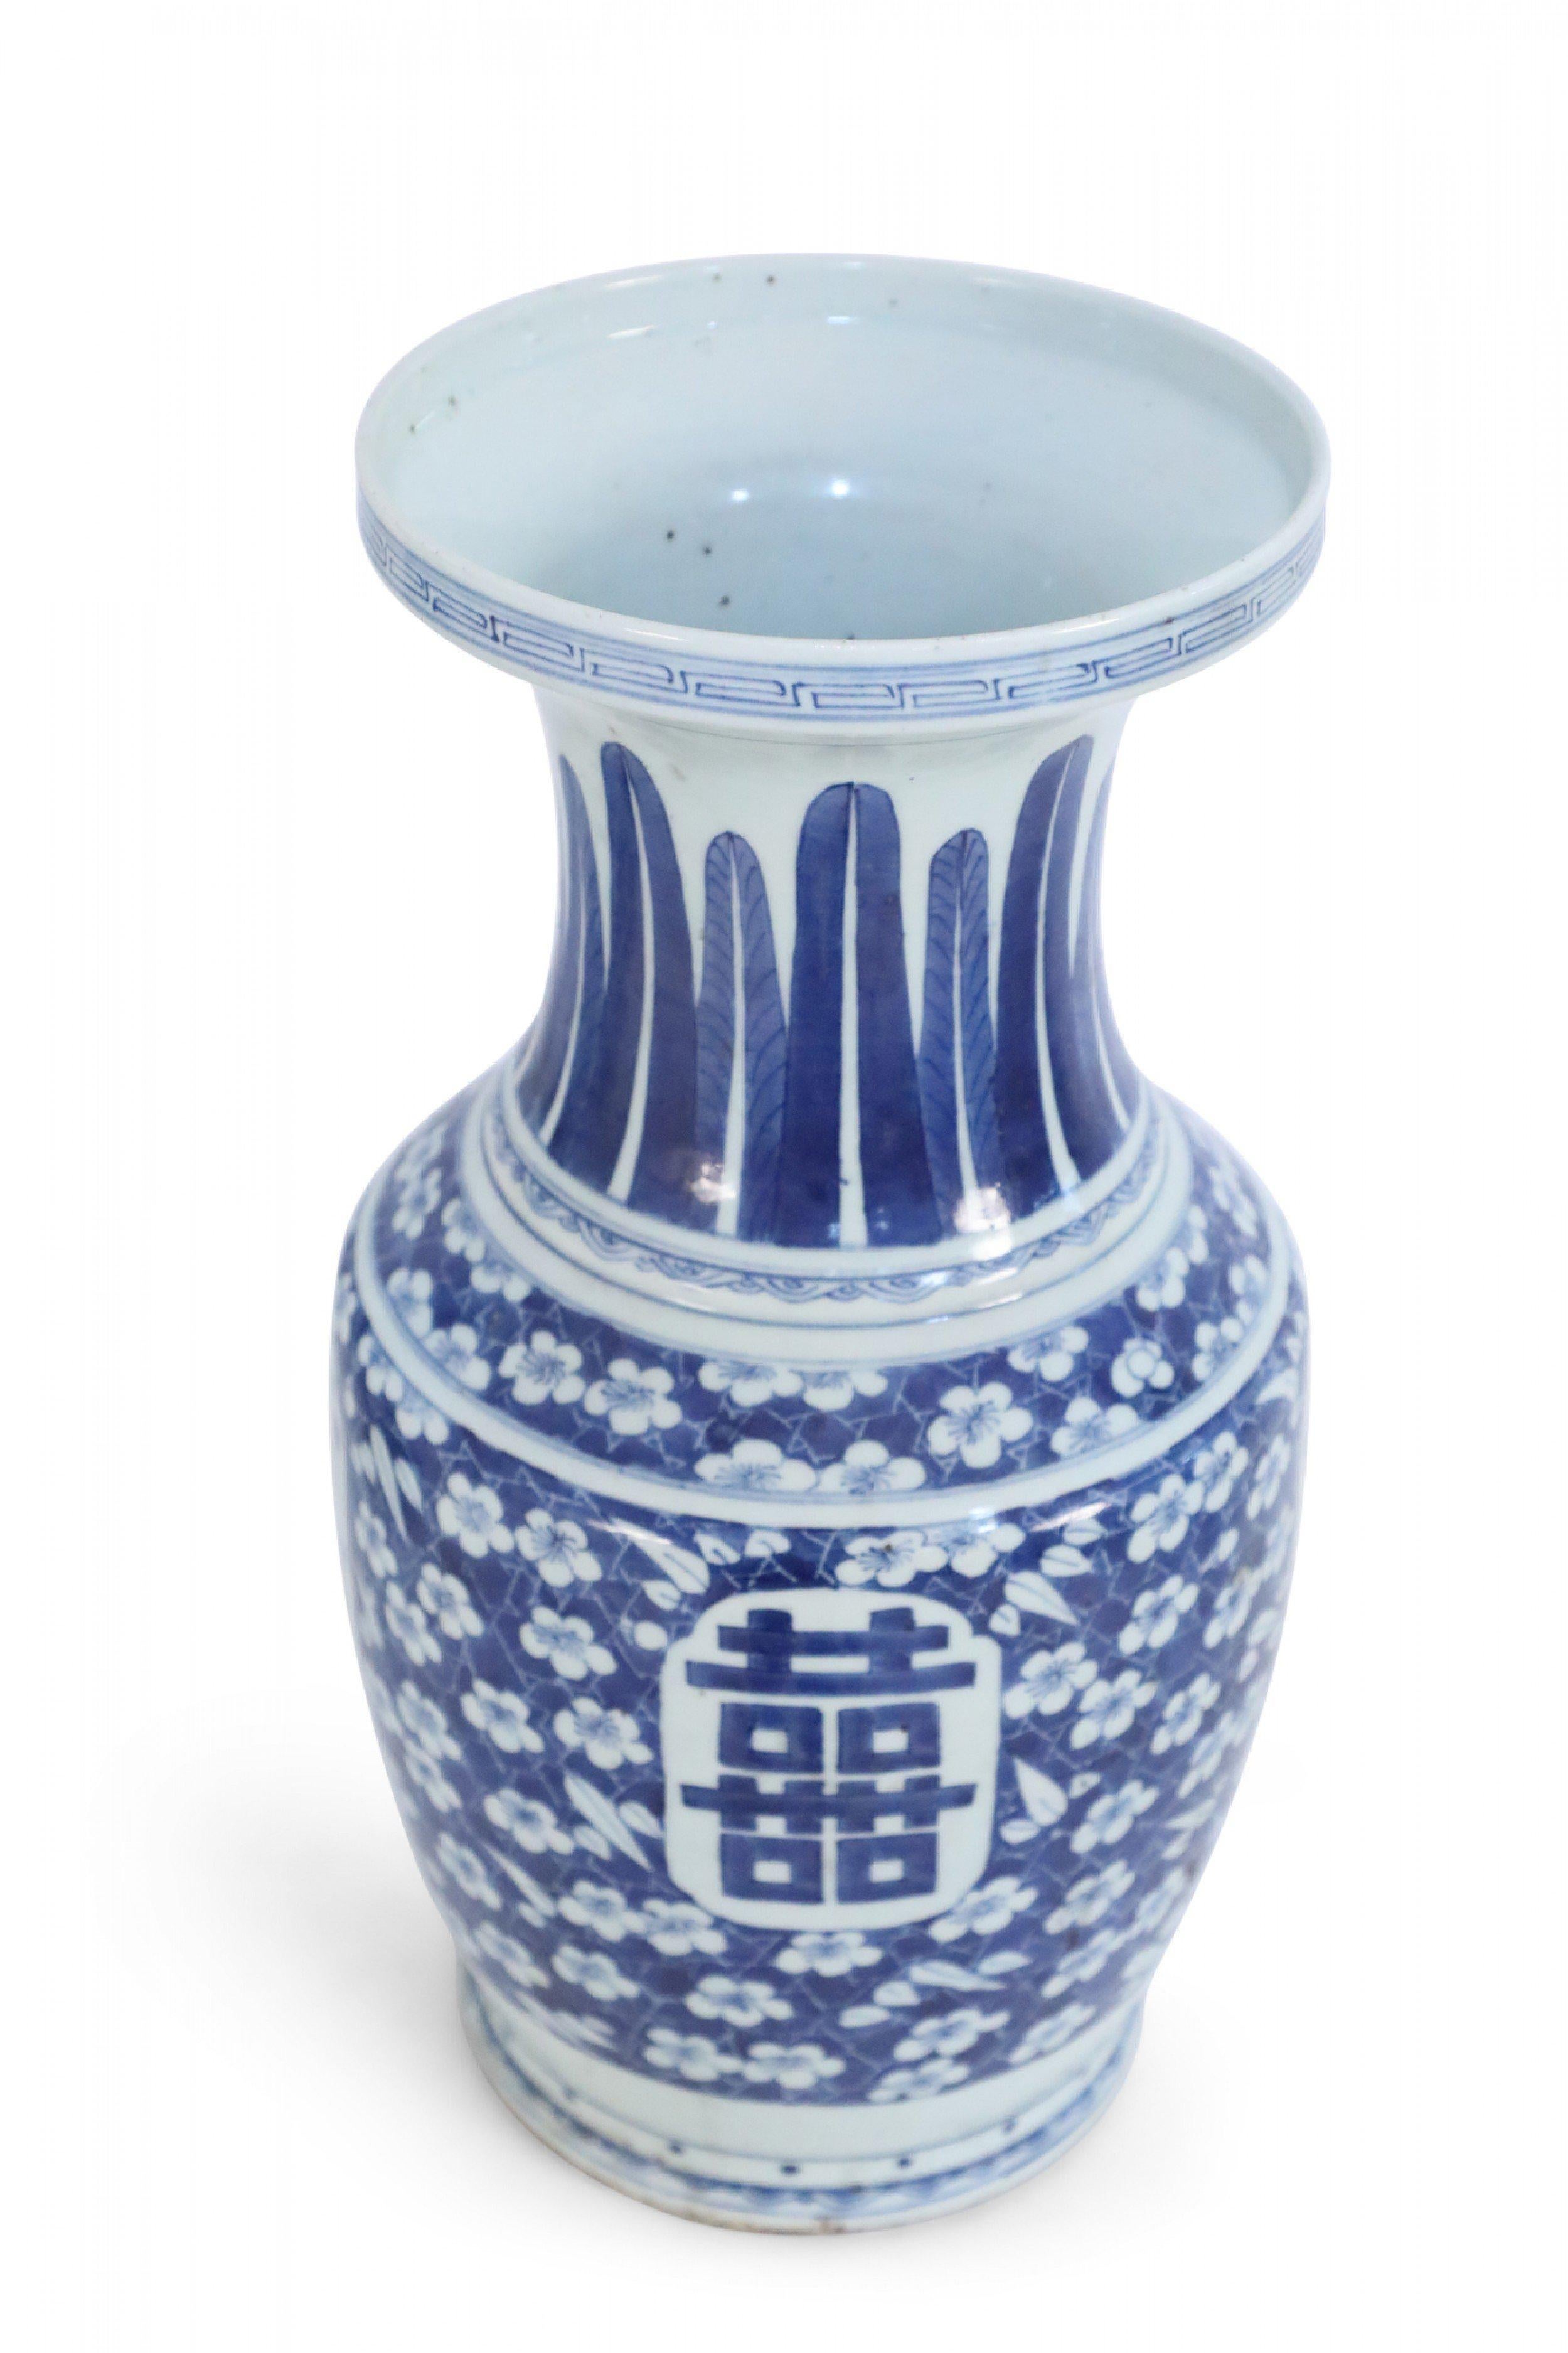 Chinese White and Blue Feather and Floral Motif Porcelain Urn For Sale 2